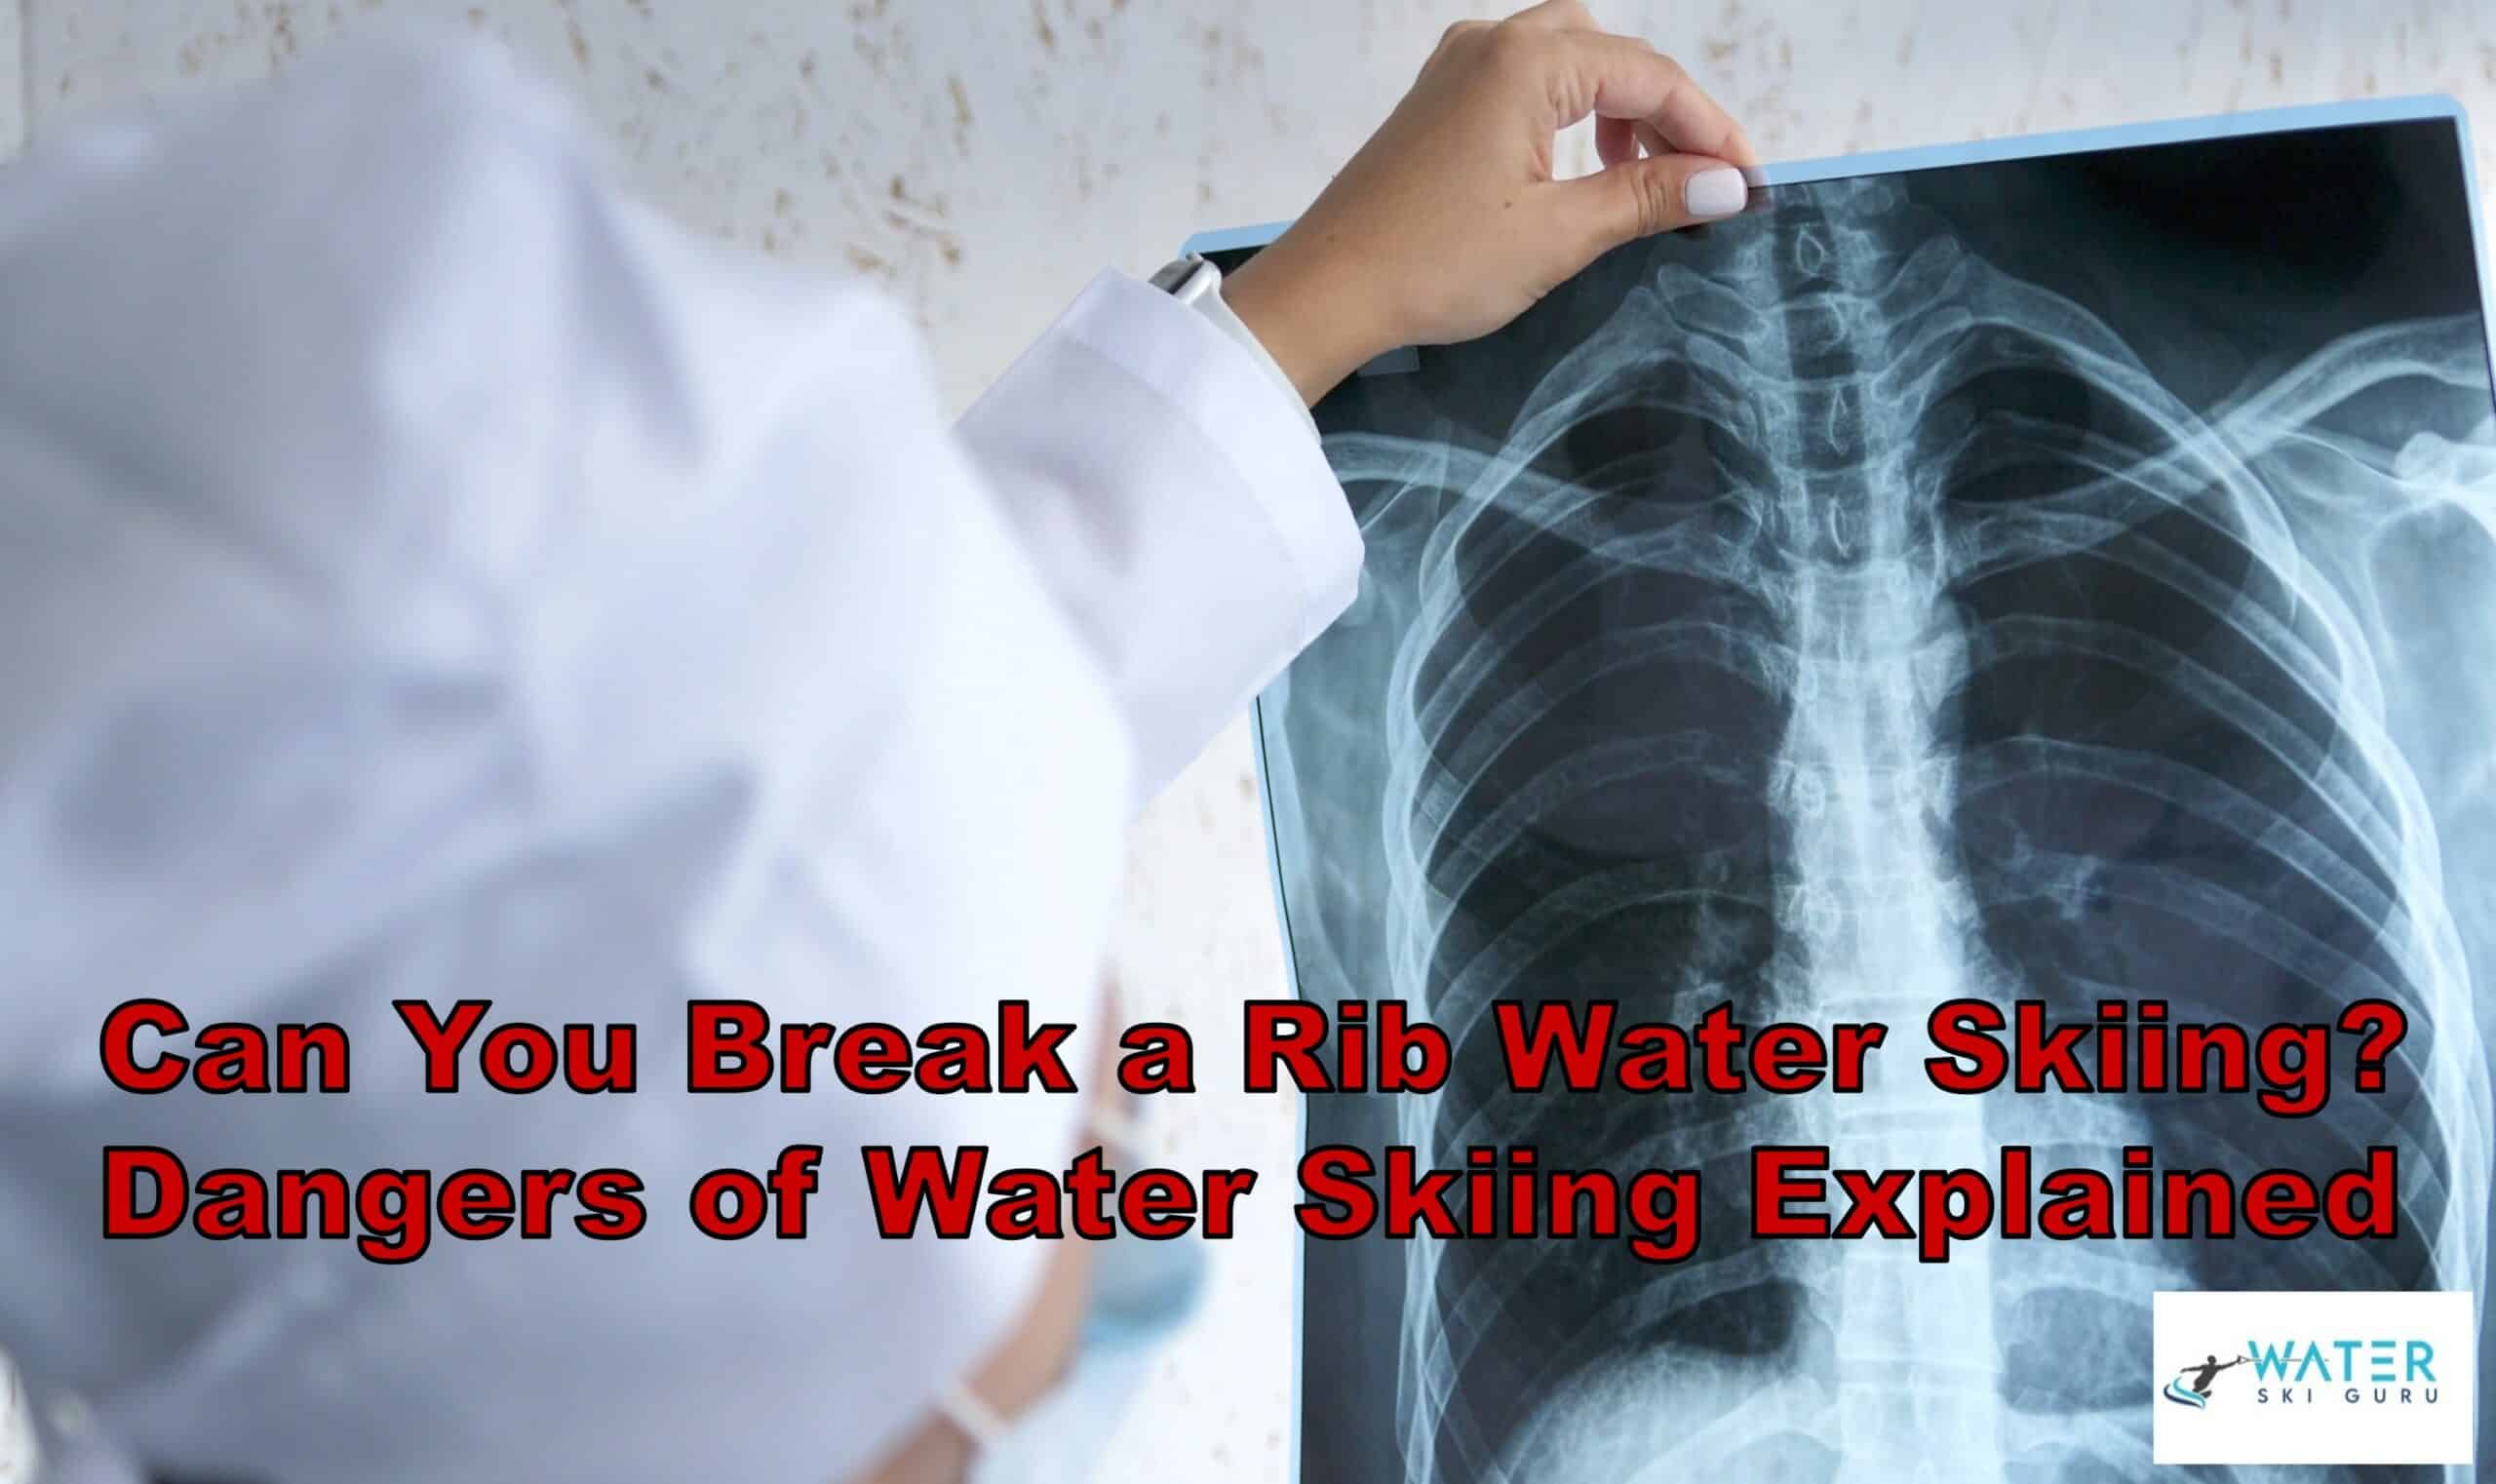 Can You Break a Rib Water Skiing Dangers of Water Skiing Explained